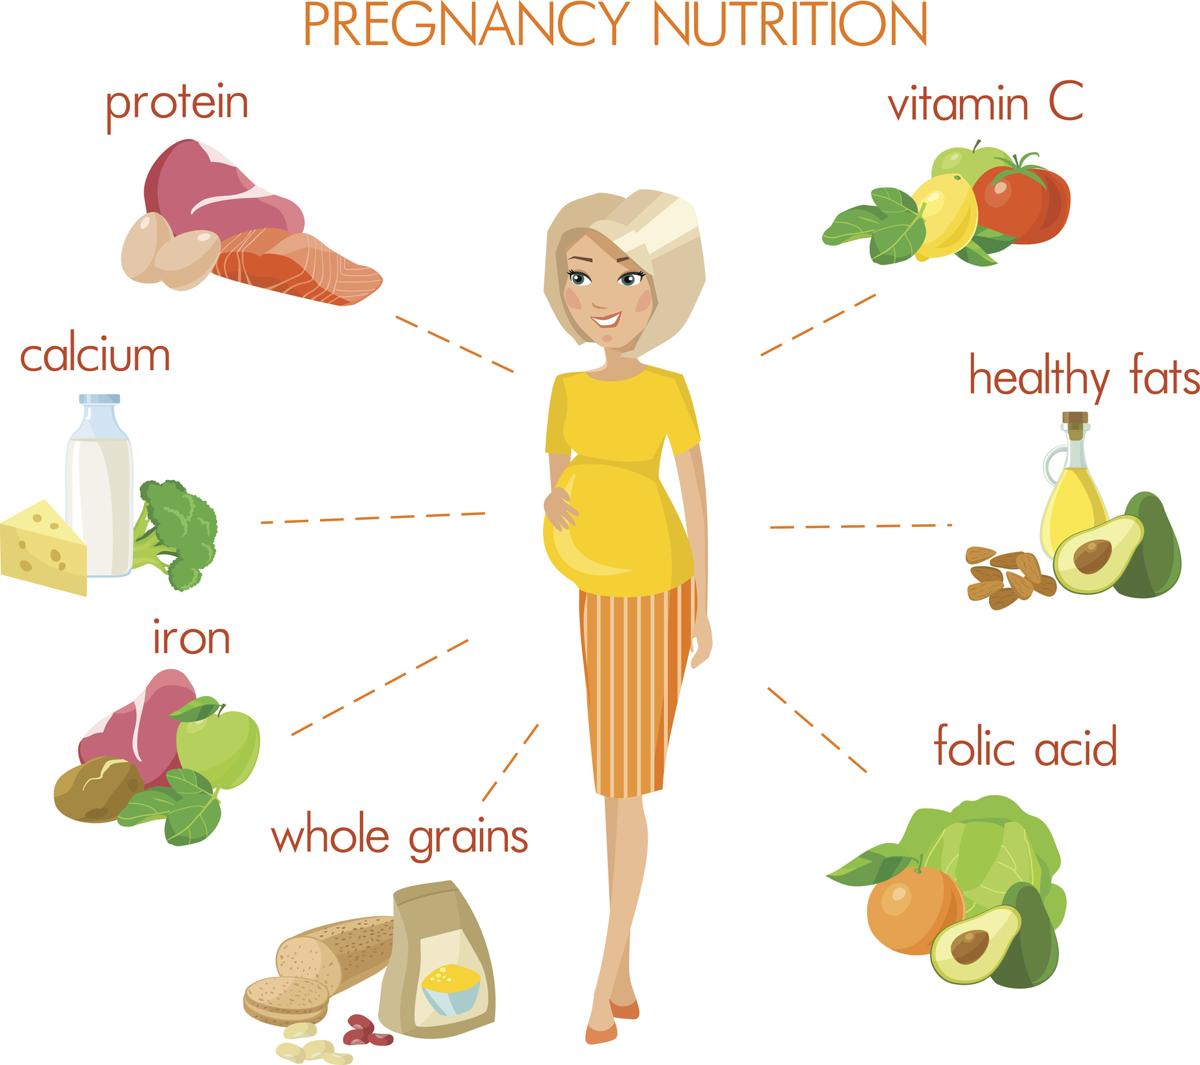 What Not to Eat During Pregnancy